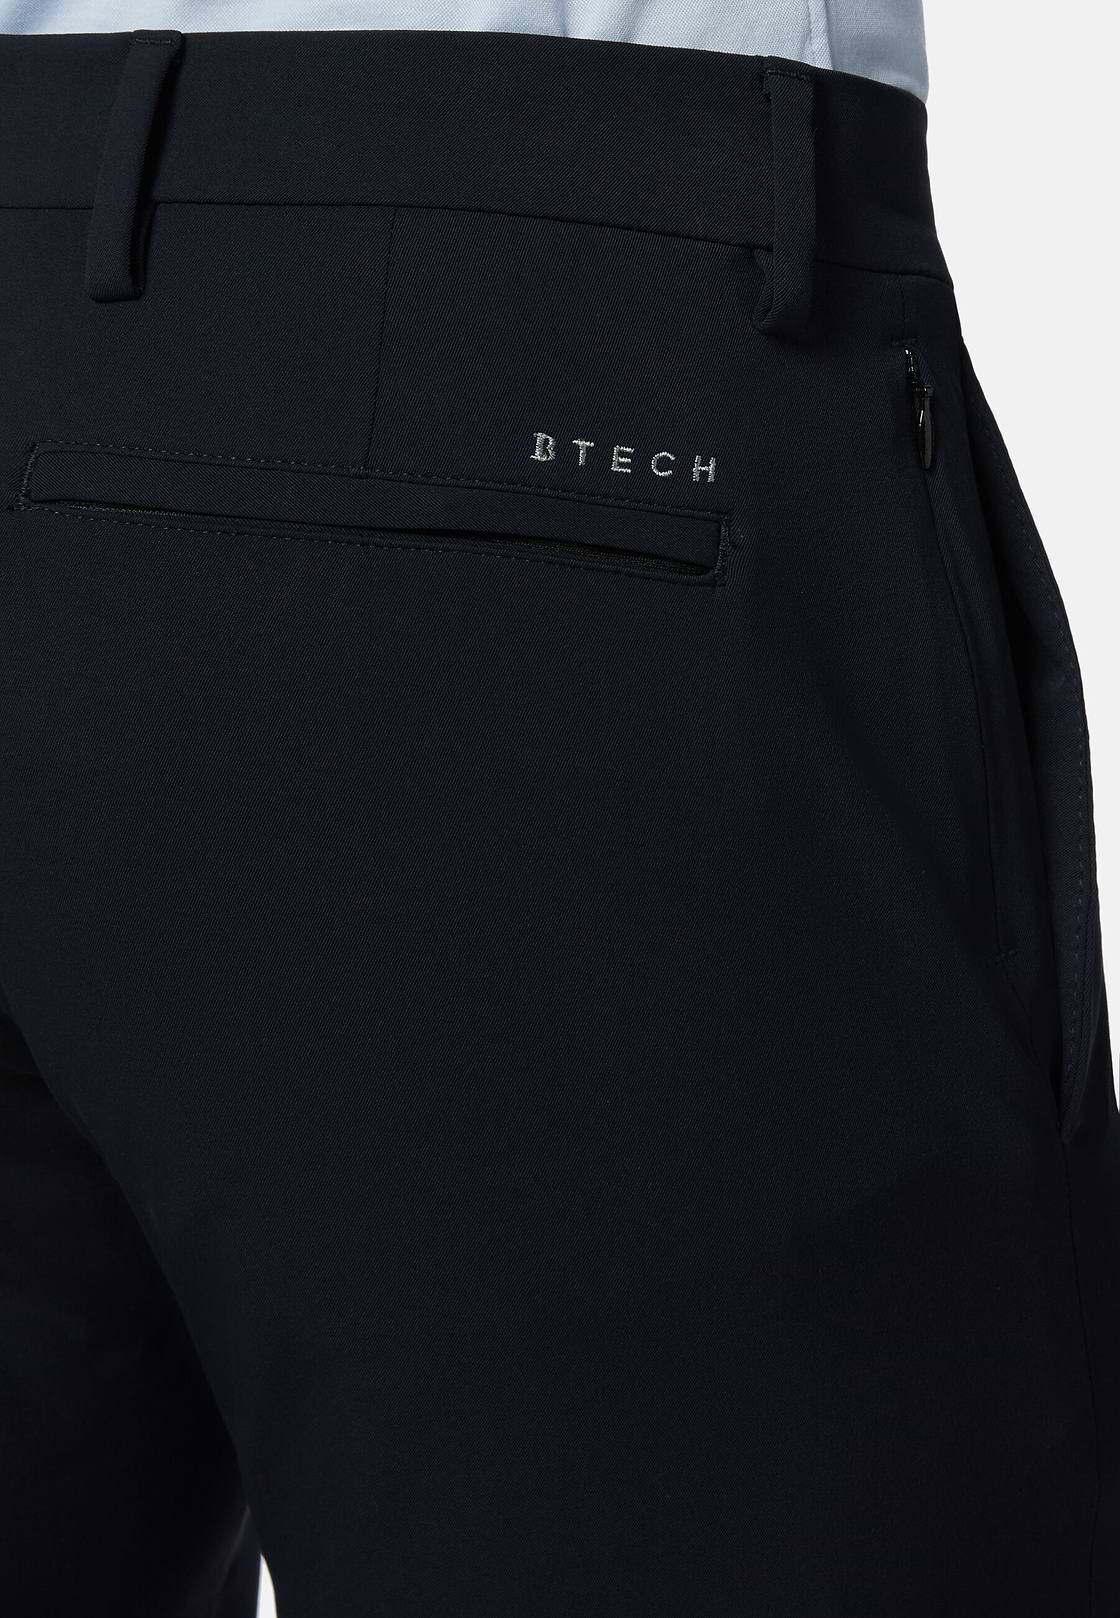 BTech Performance Stretch Nylon Trousers, Navy blue, hi-res